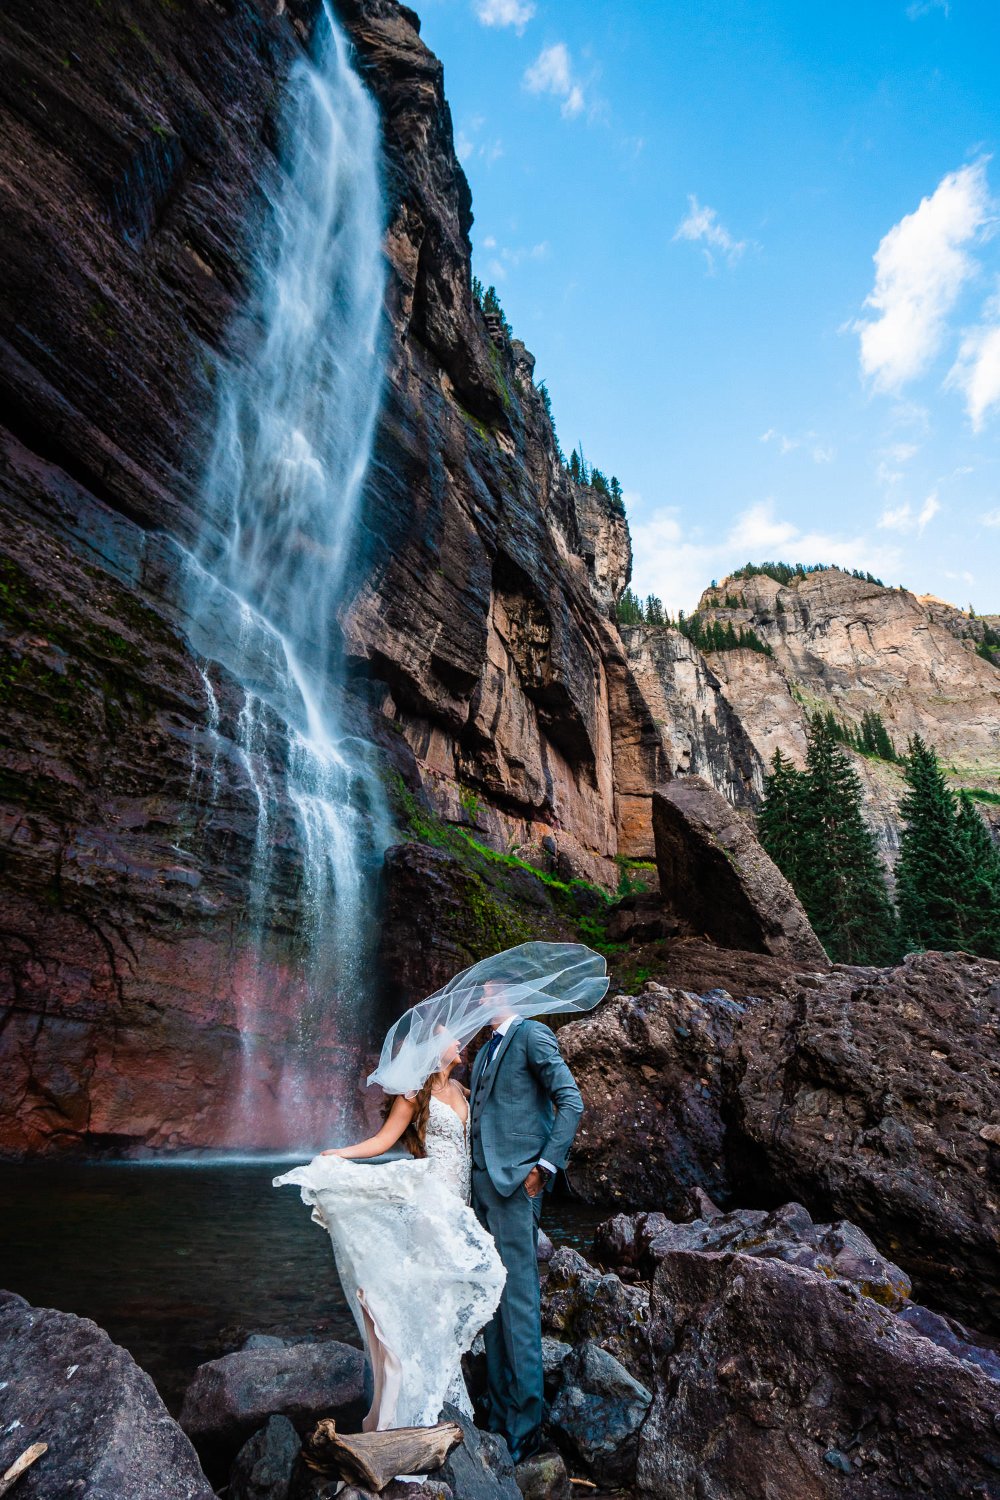 A bride and groom capturing unforgettable elopement photos in front of a stunning waterfall.